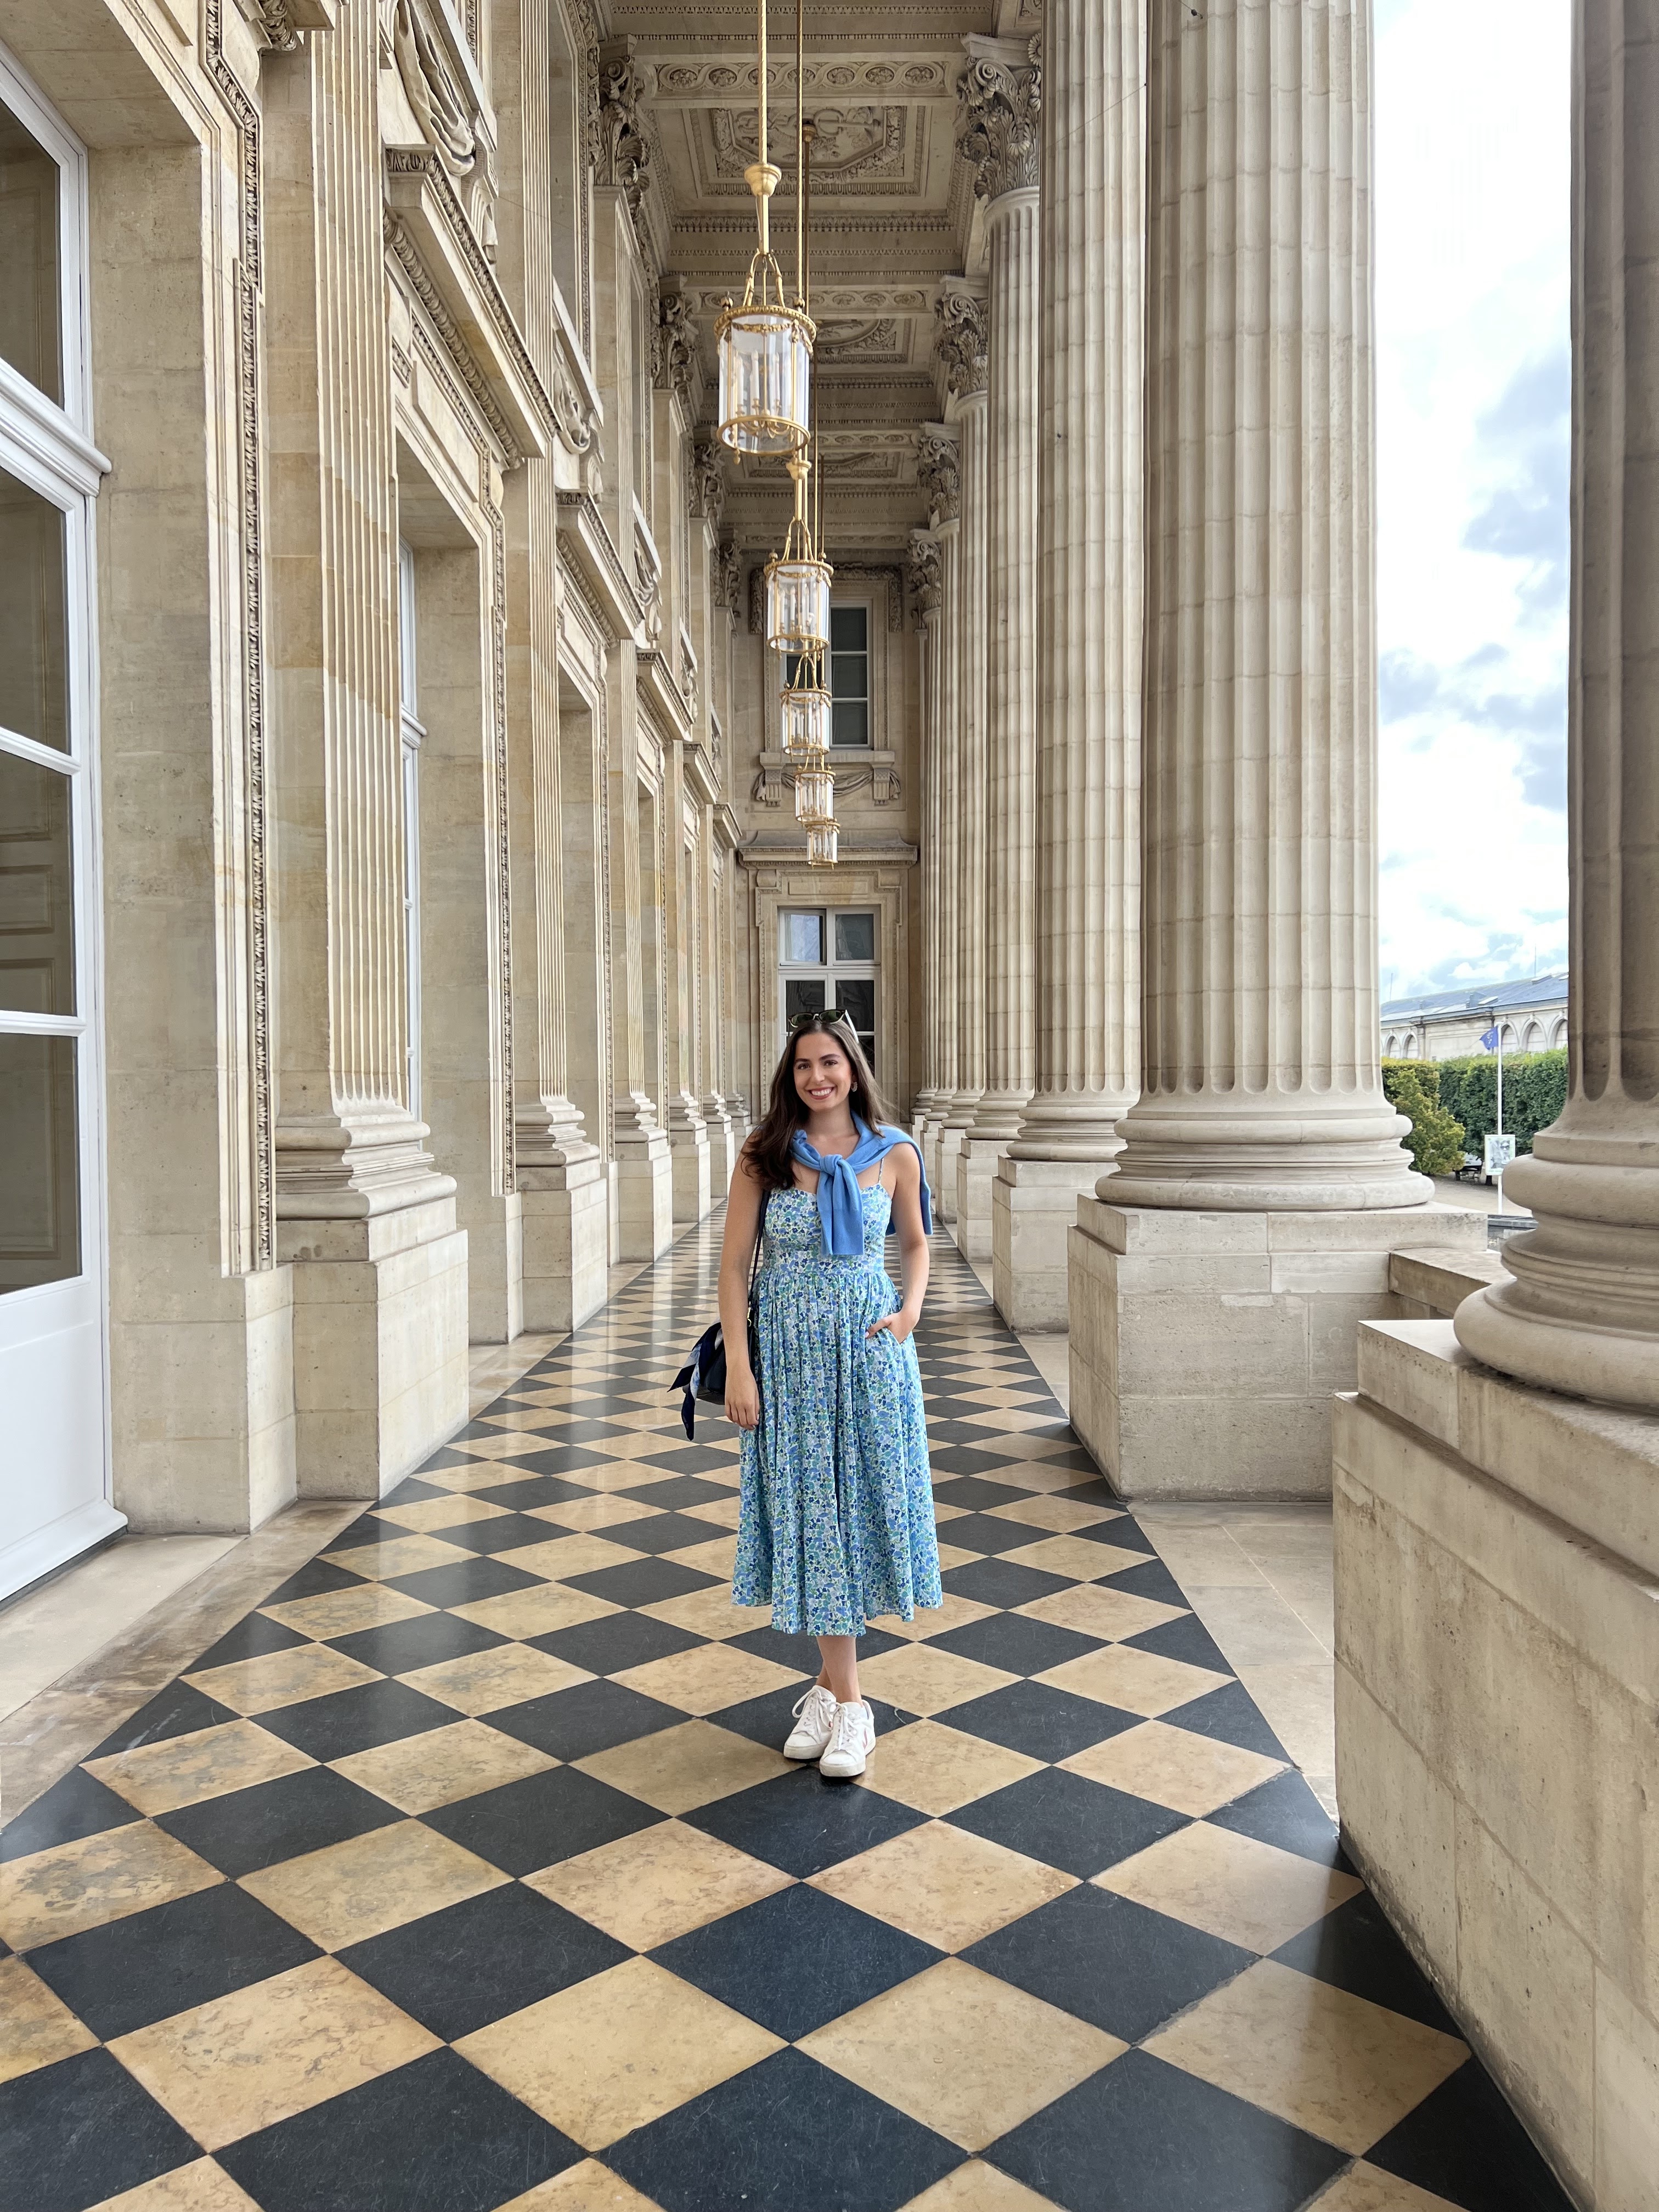 what to wear in paris in summer, summer outfit, paris summer outfit, midi dress, floral dress, floral midi dress, jcrew dress, blue cashmere sweater, paris